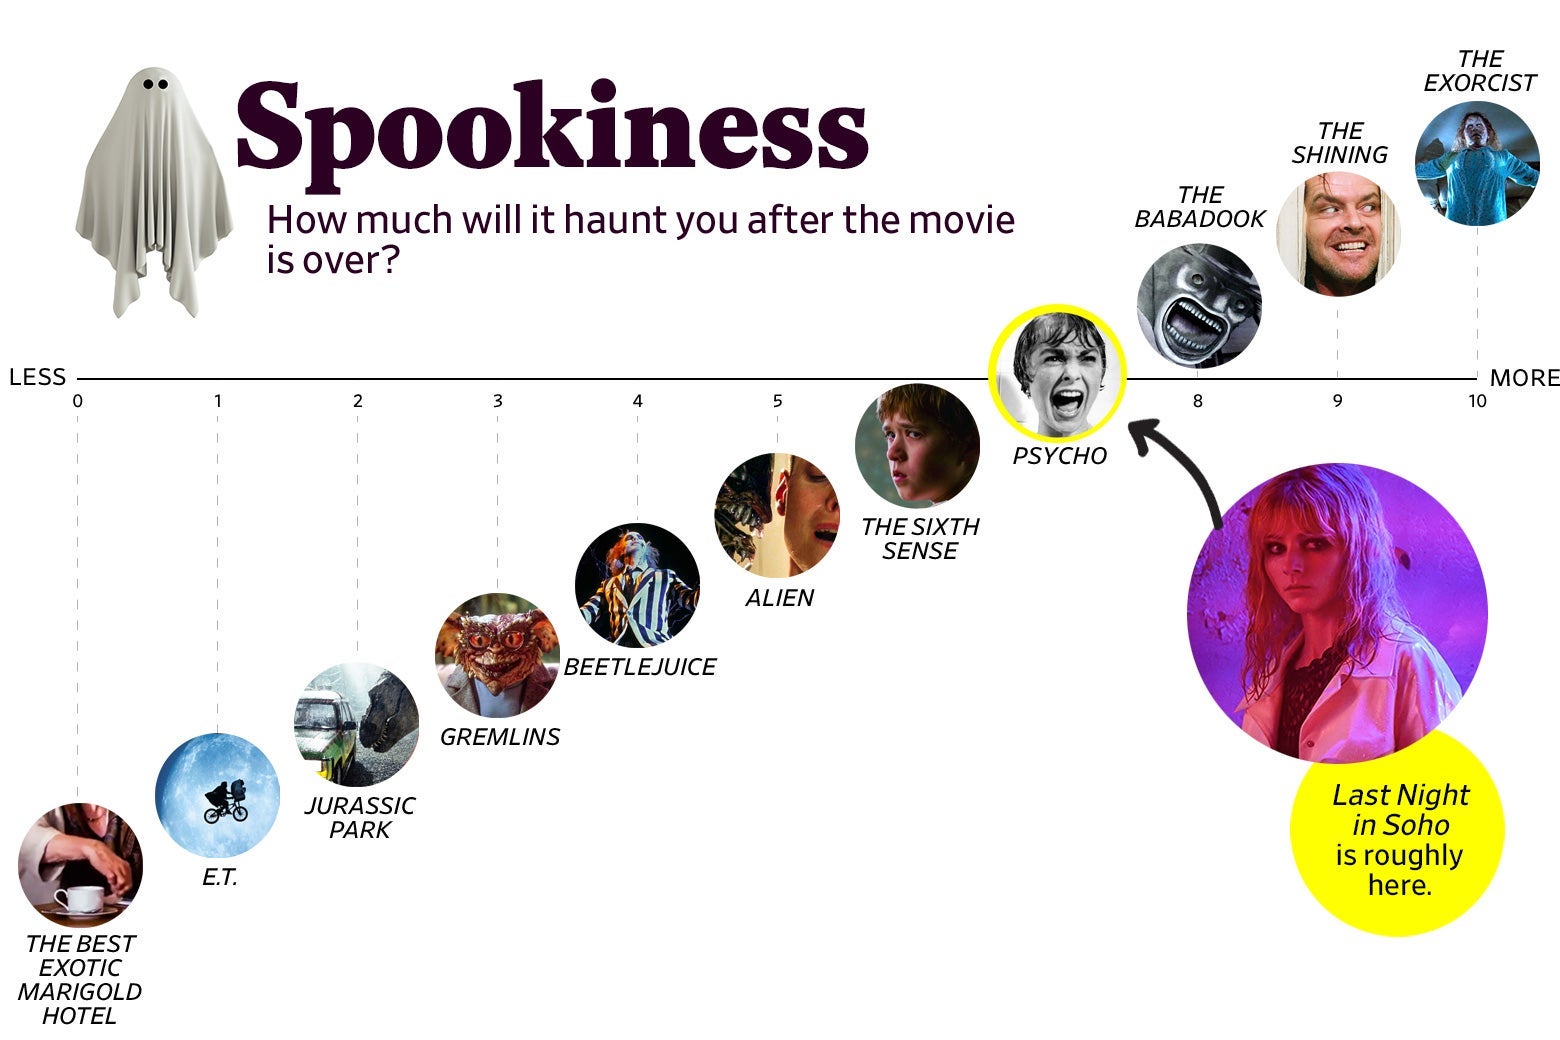 A chart titled “Spookiness: How much will it haunt you after the movie is over?” shows that Last Night in Soho ranks a 7 in spookiness, roughly the same as Psycho. The scale ranges from The Best Exotic Marigold Hotel (0) to The Exorcist (10). 